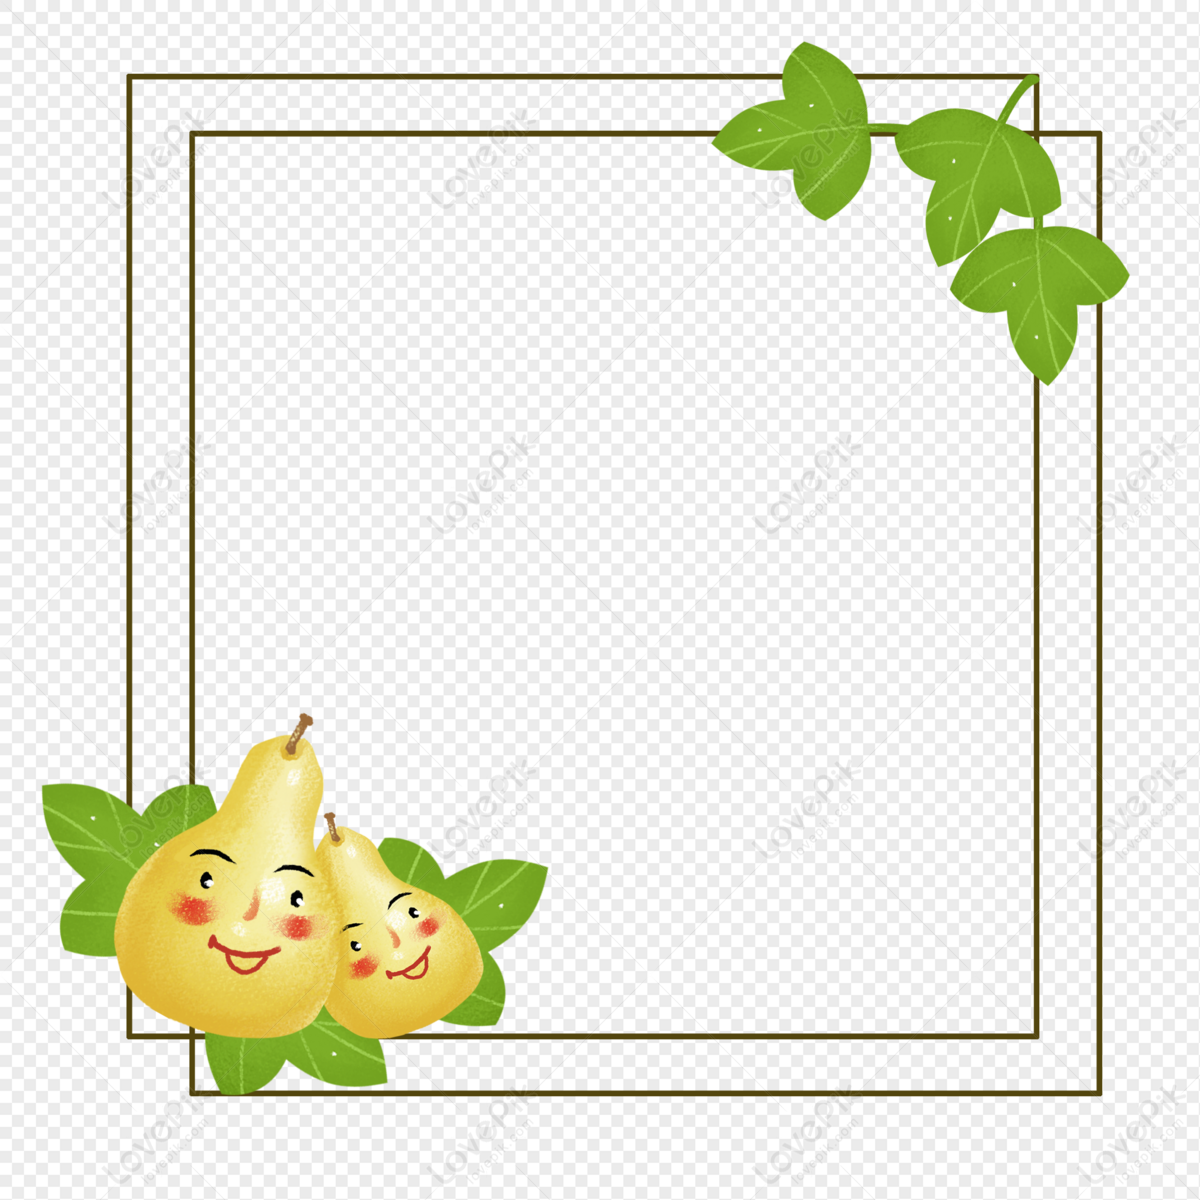 Fruit Border PNG Transparent And Clipart Image For Free Download ...